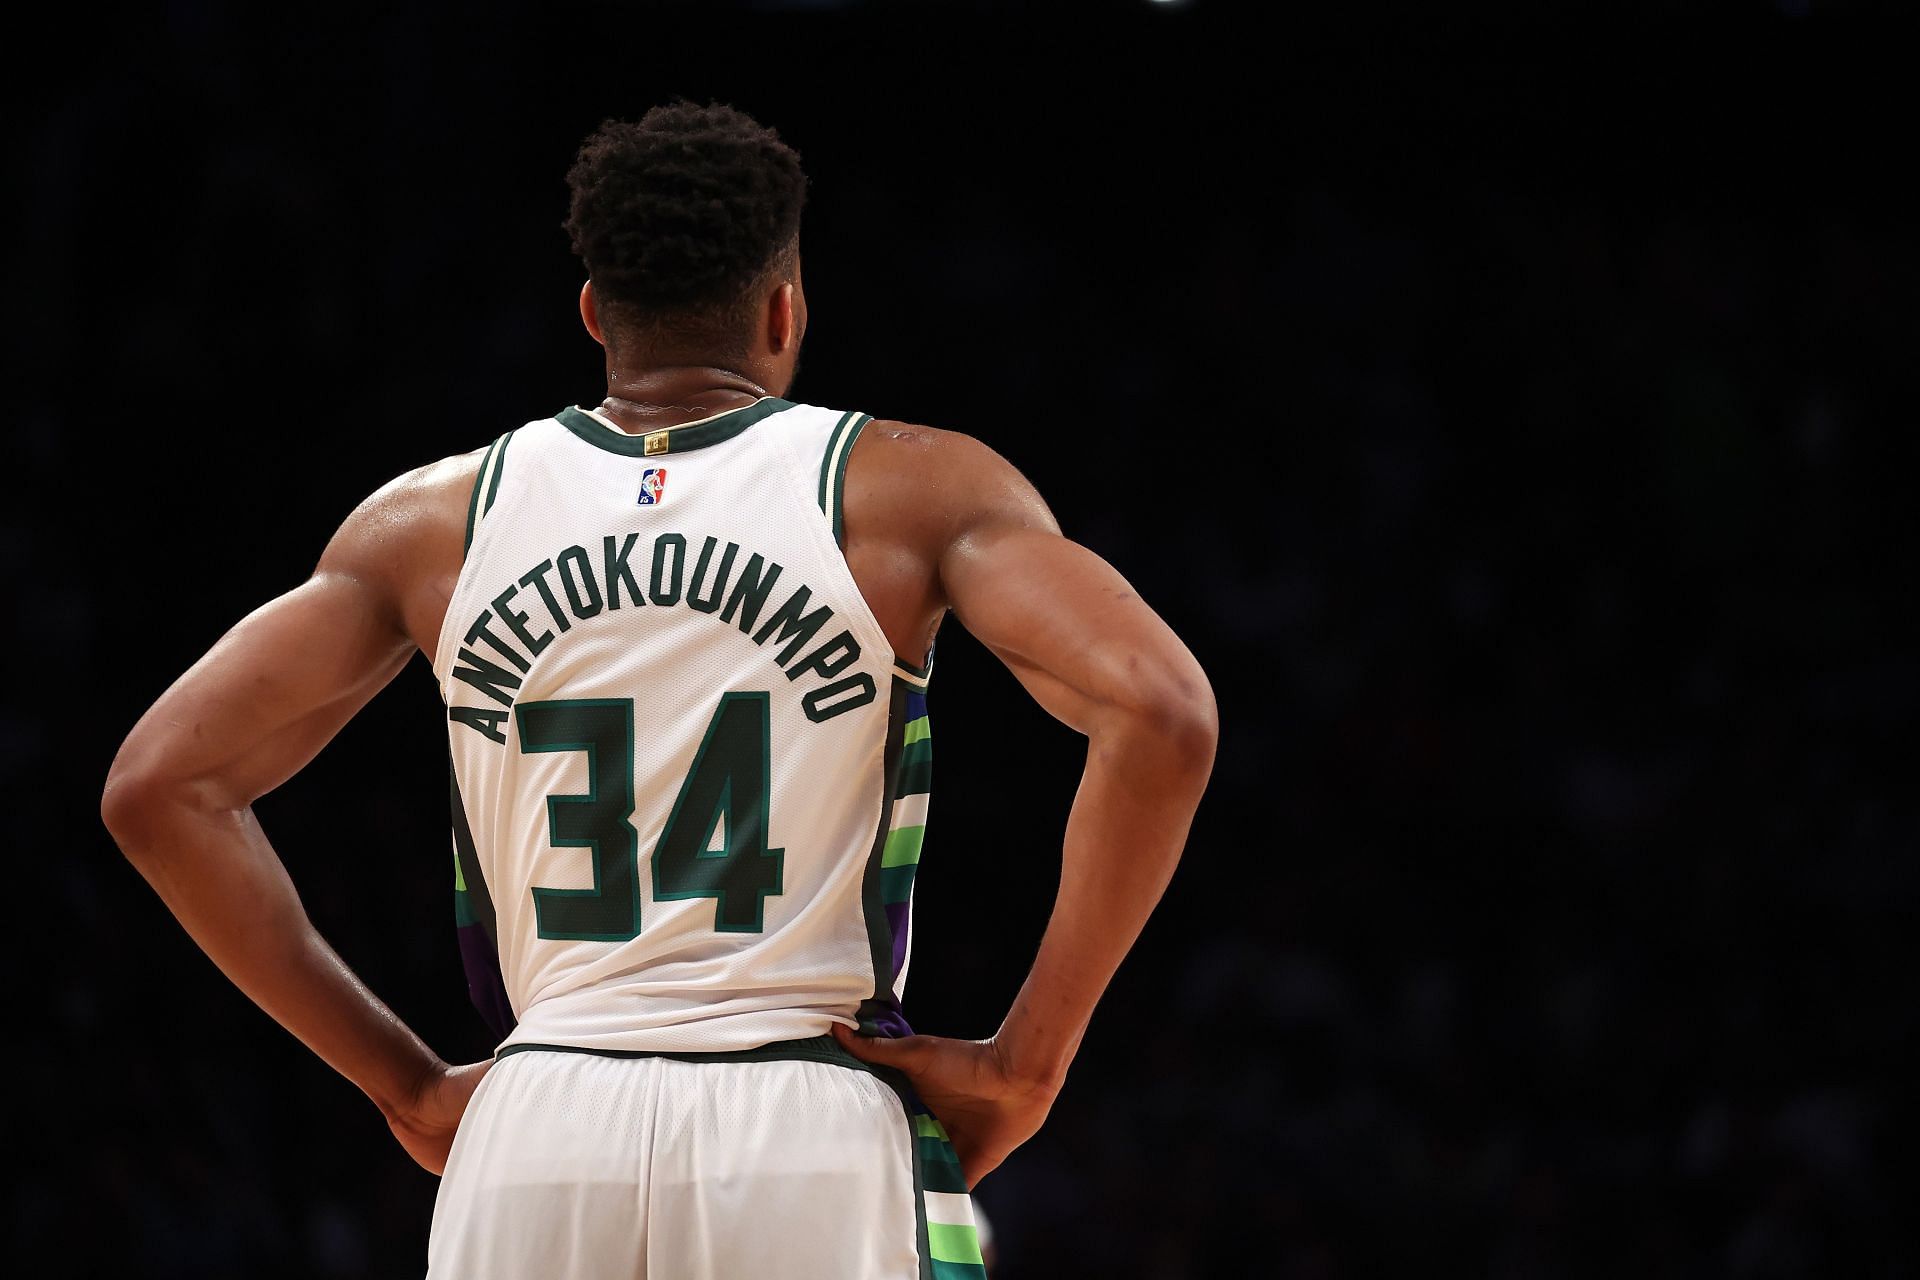 Giannis Antetokounmpo is leading the hopes of the Bucks fans who will be hoping for the team to win the championship this year as well